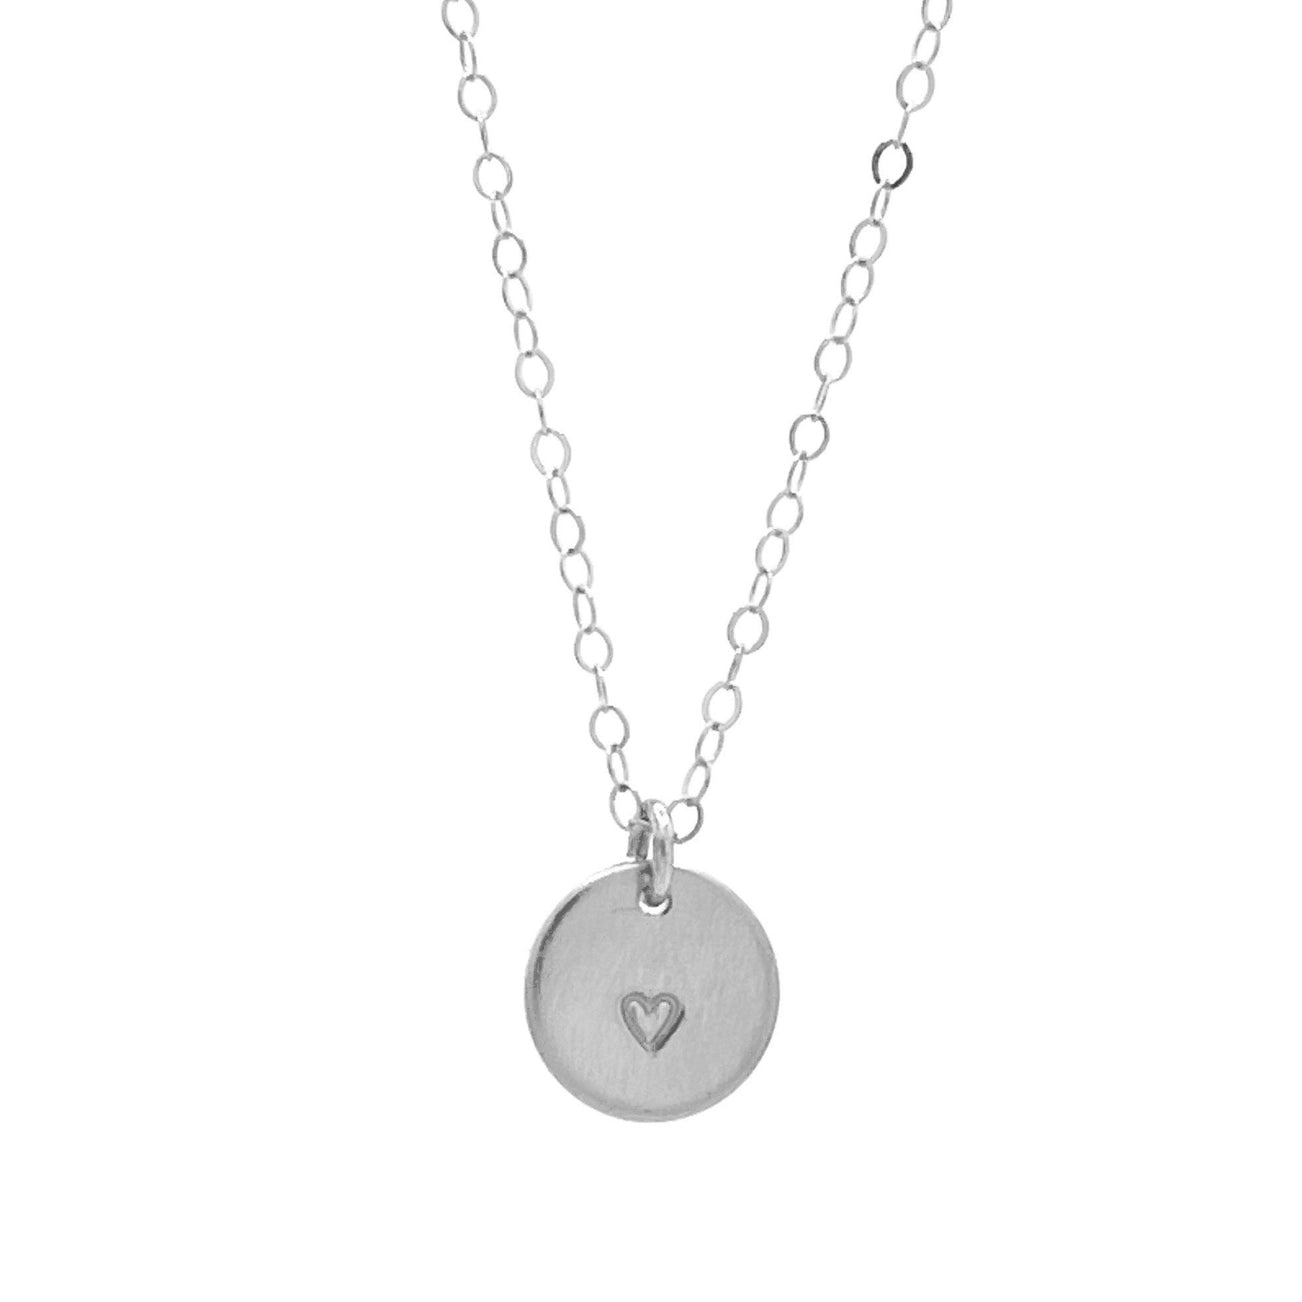 Hand Stamped Disc Necklace - Heart